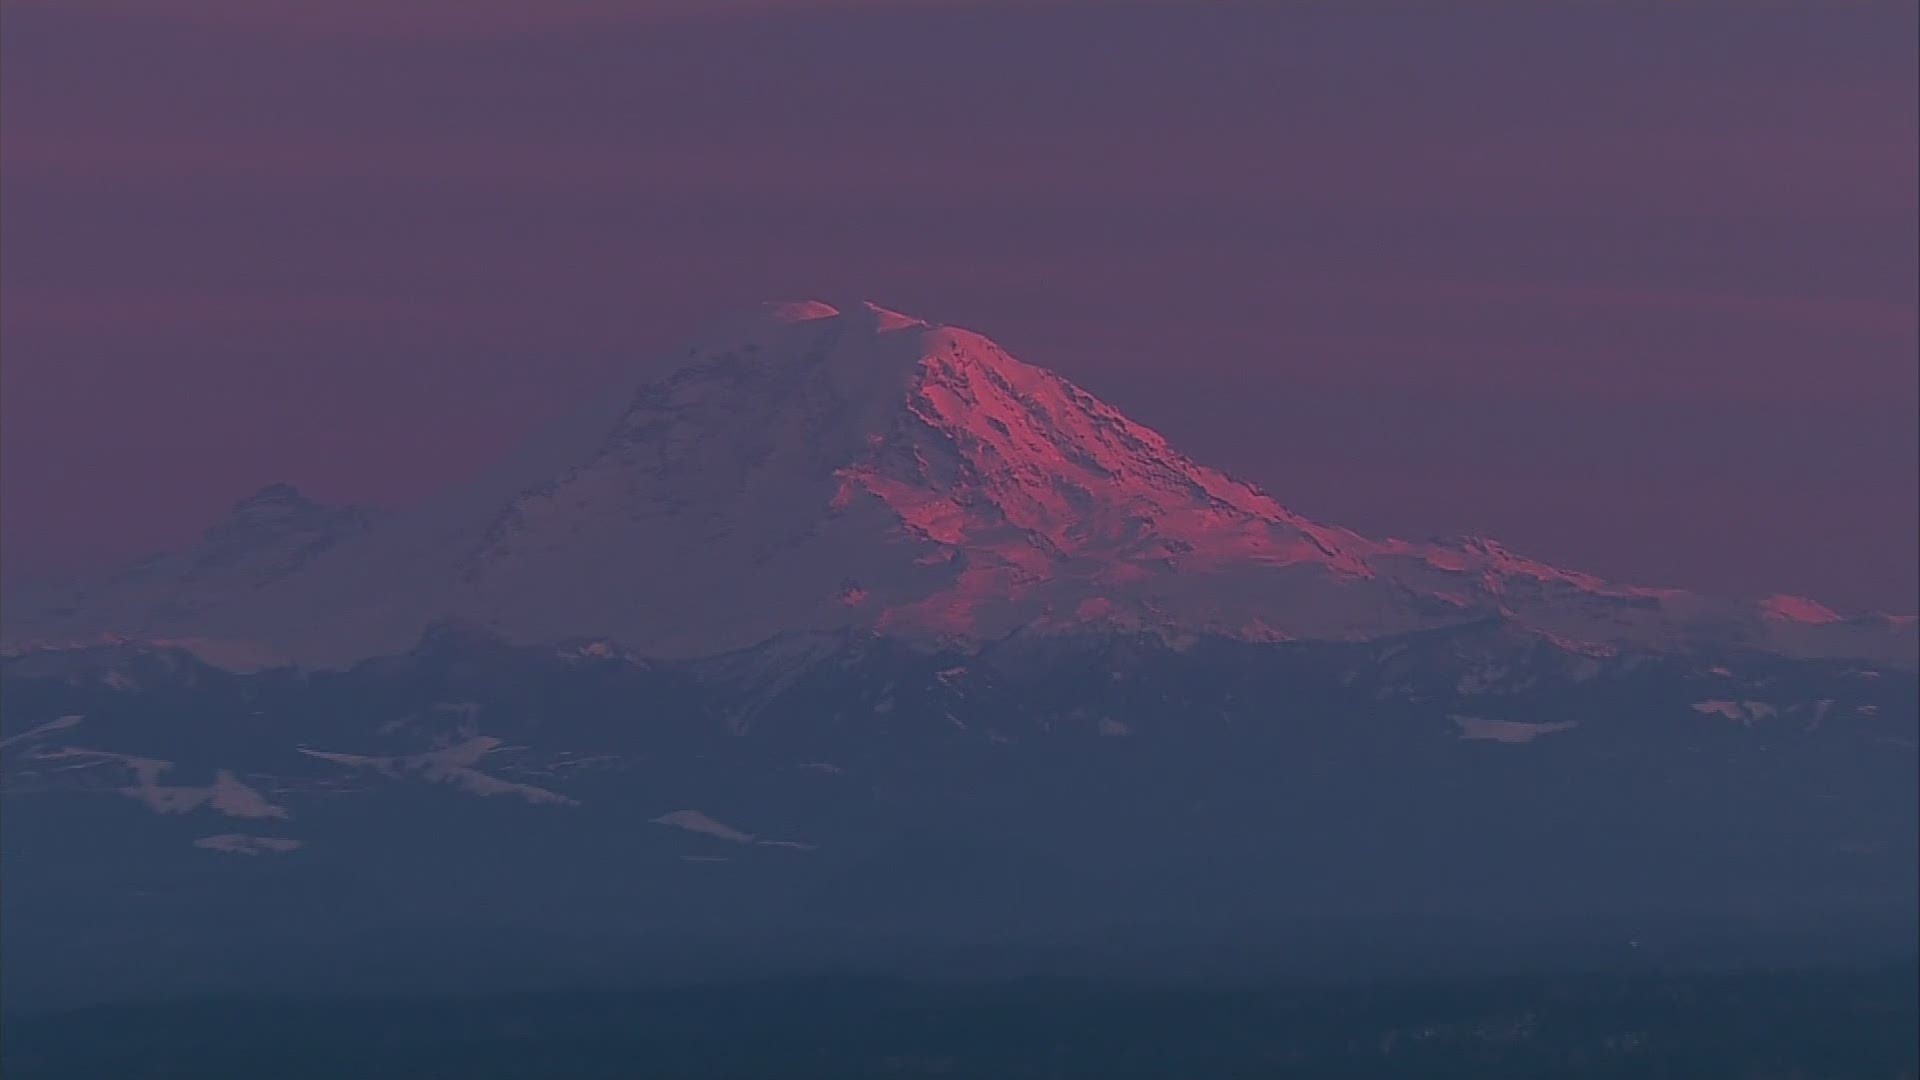 KING 5 helicopter SkyKING caught the tail end of Tuesday's sun setting over gorgeous Mount Rainier.